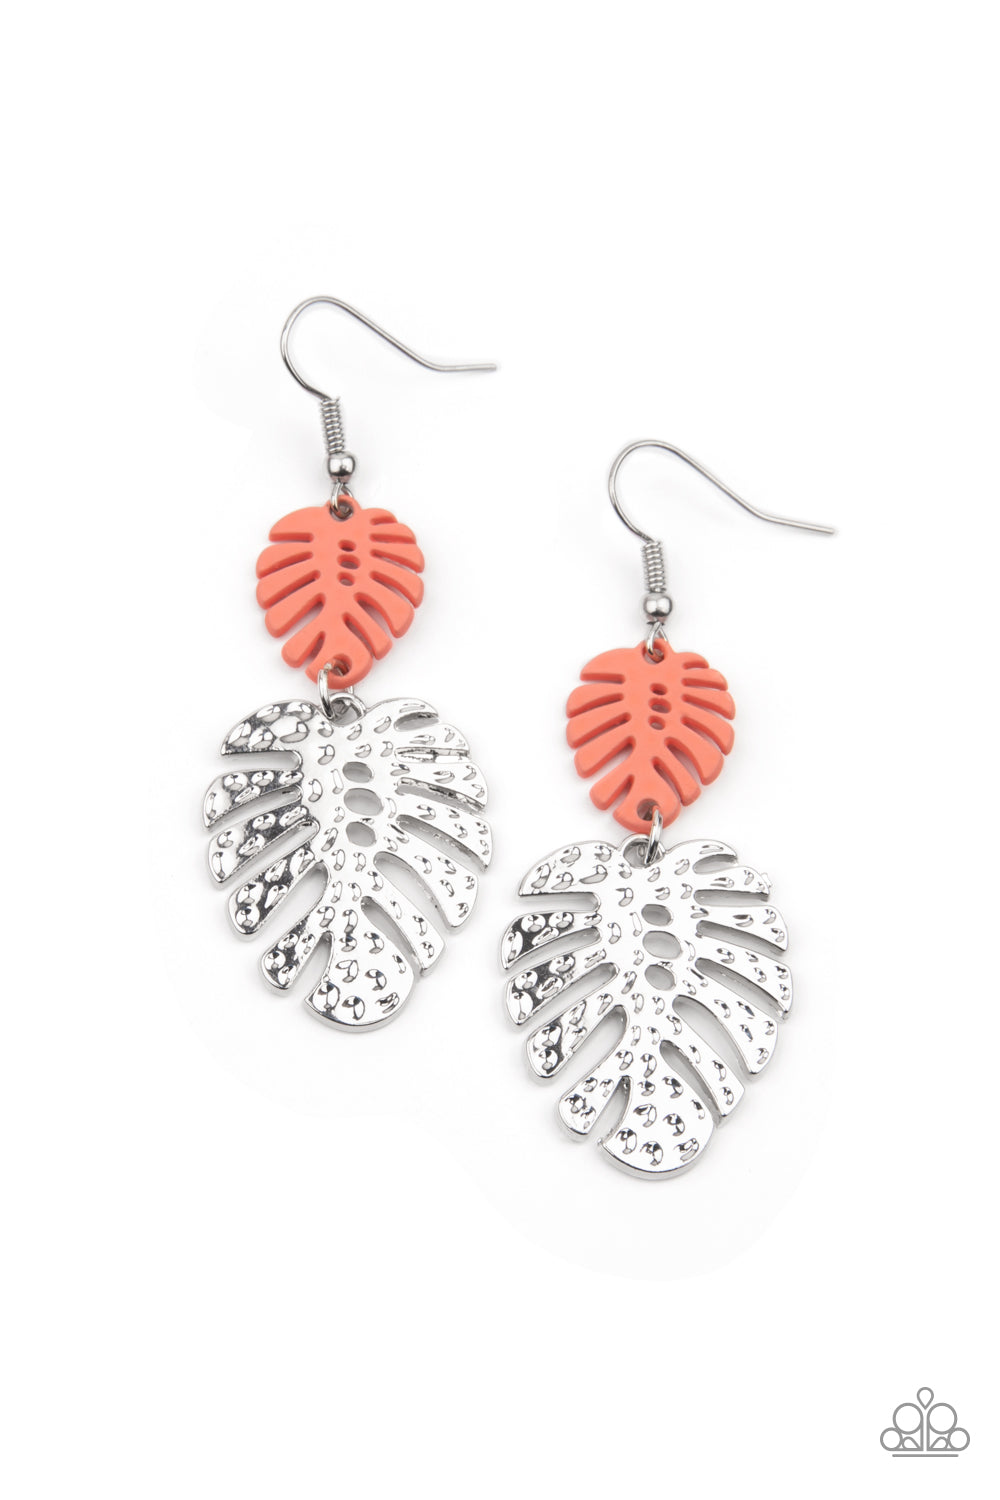 Palm Tree Cabana Orange Earring - Paparazzi Accessories  A coral palm leaf attaches to a hammered silver palm leaf, creating a colorful island inspired frame. Earring attaches to a standard fishhook fitting.  All Paparazzi Accessories are lead free and nickel free!  Sold as one pair of earrings.